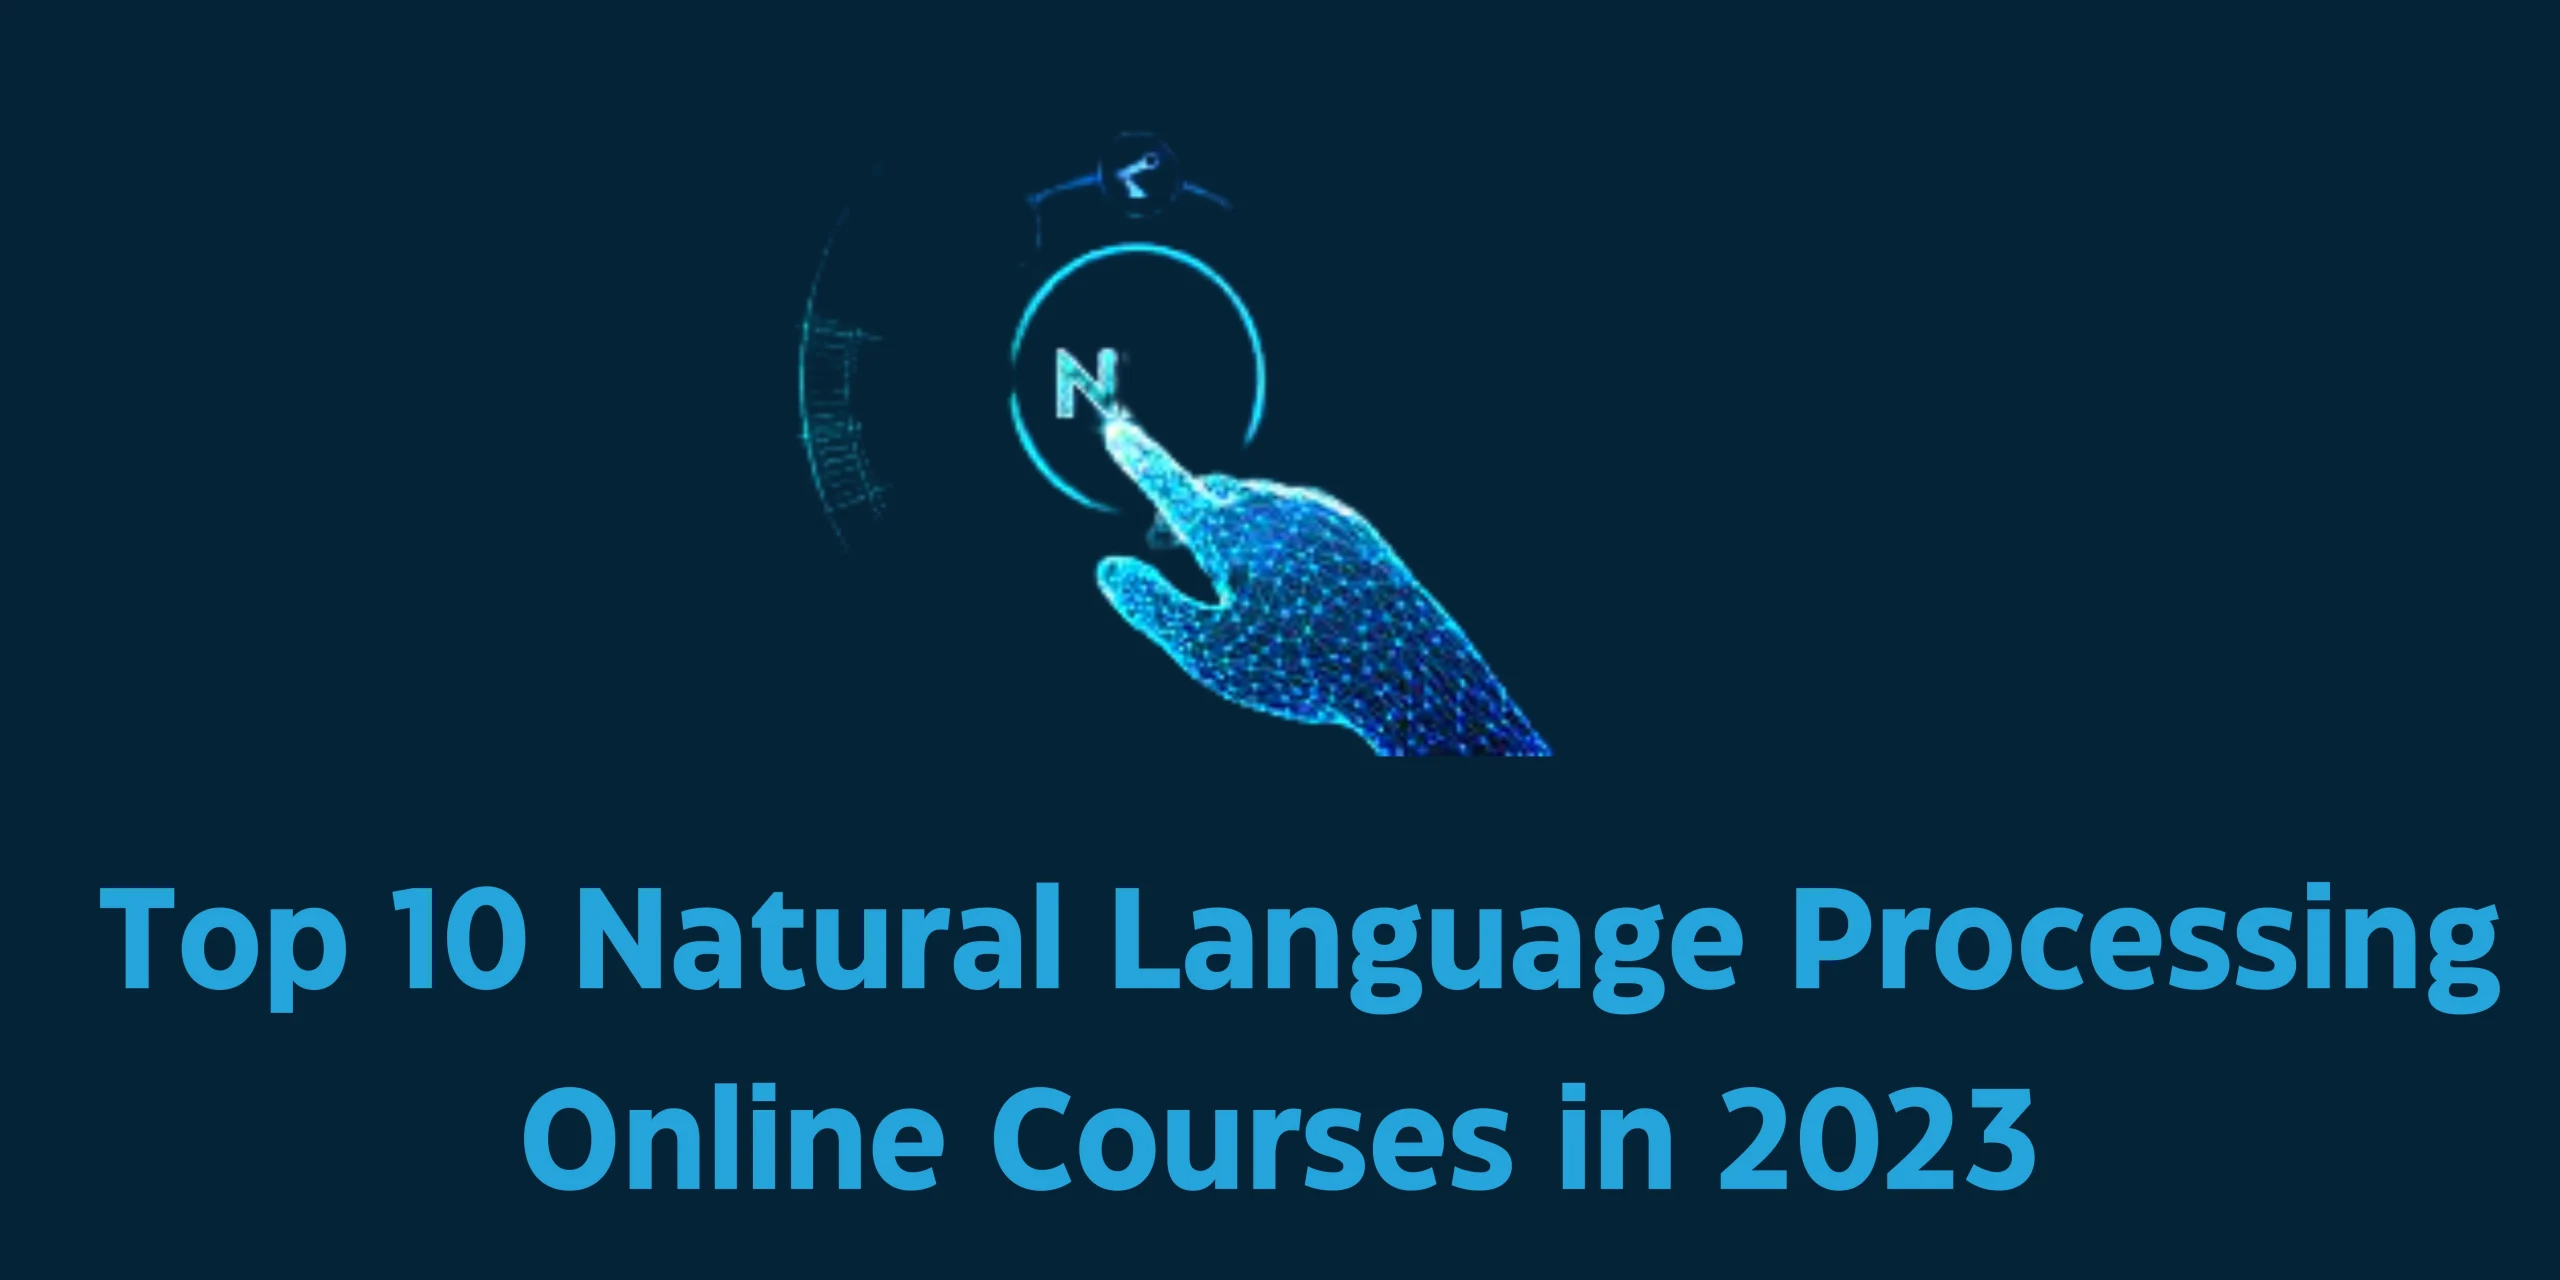 Top 10 Natural Language Processing Online Courses in 2023